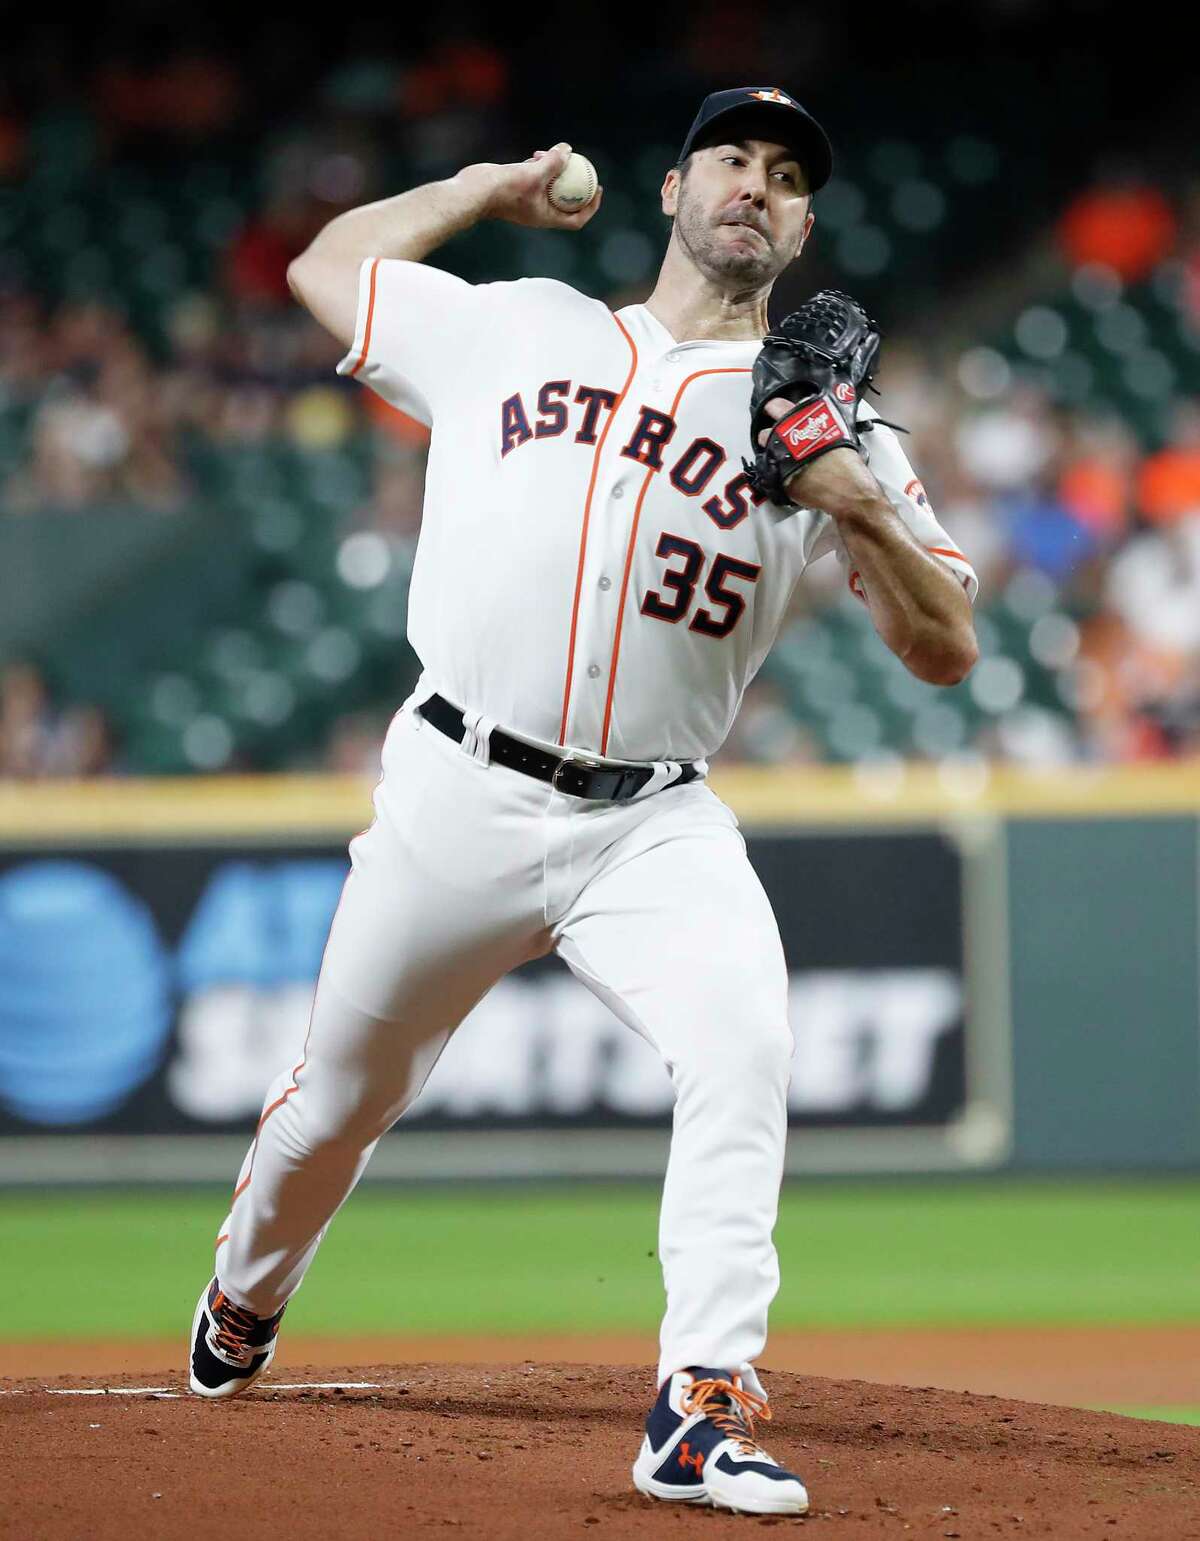 Houston Astros starting pitcher Justin Verlander (35) pitches in the first inning of a MLB baseball game at Minute Maid Park, Thursday, Sept. 12, 2019, in Houston.